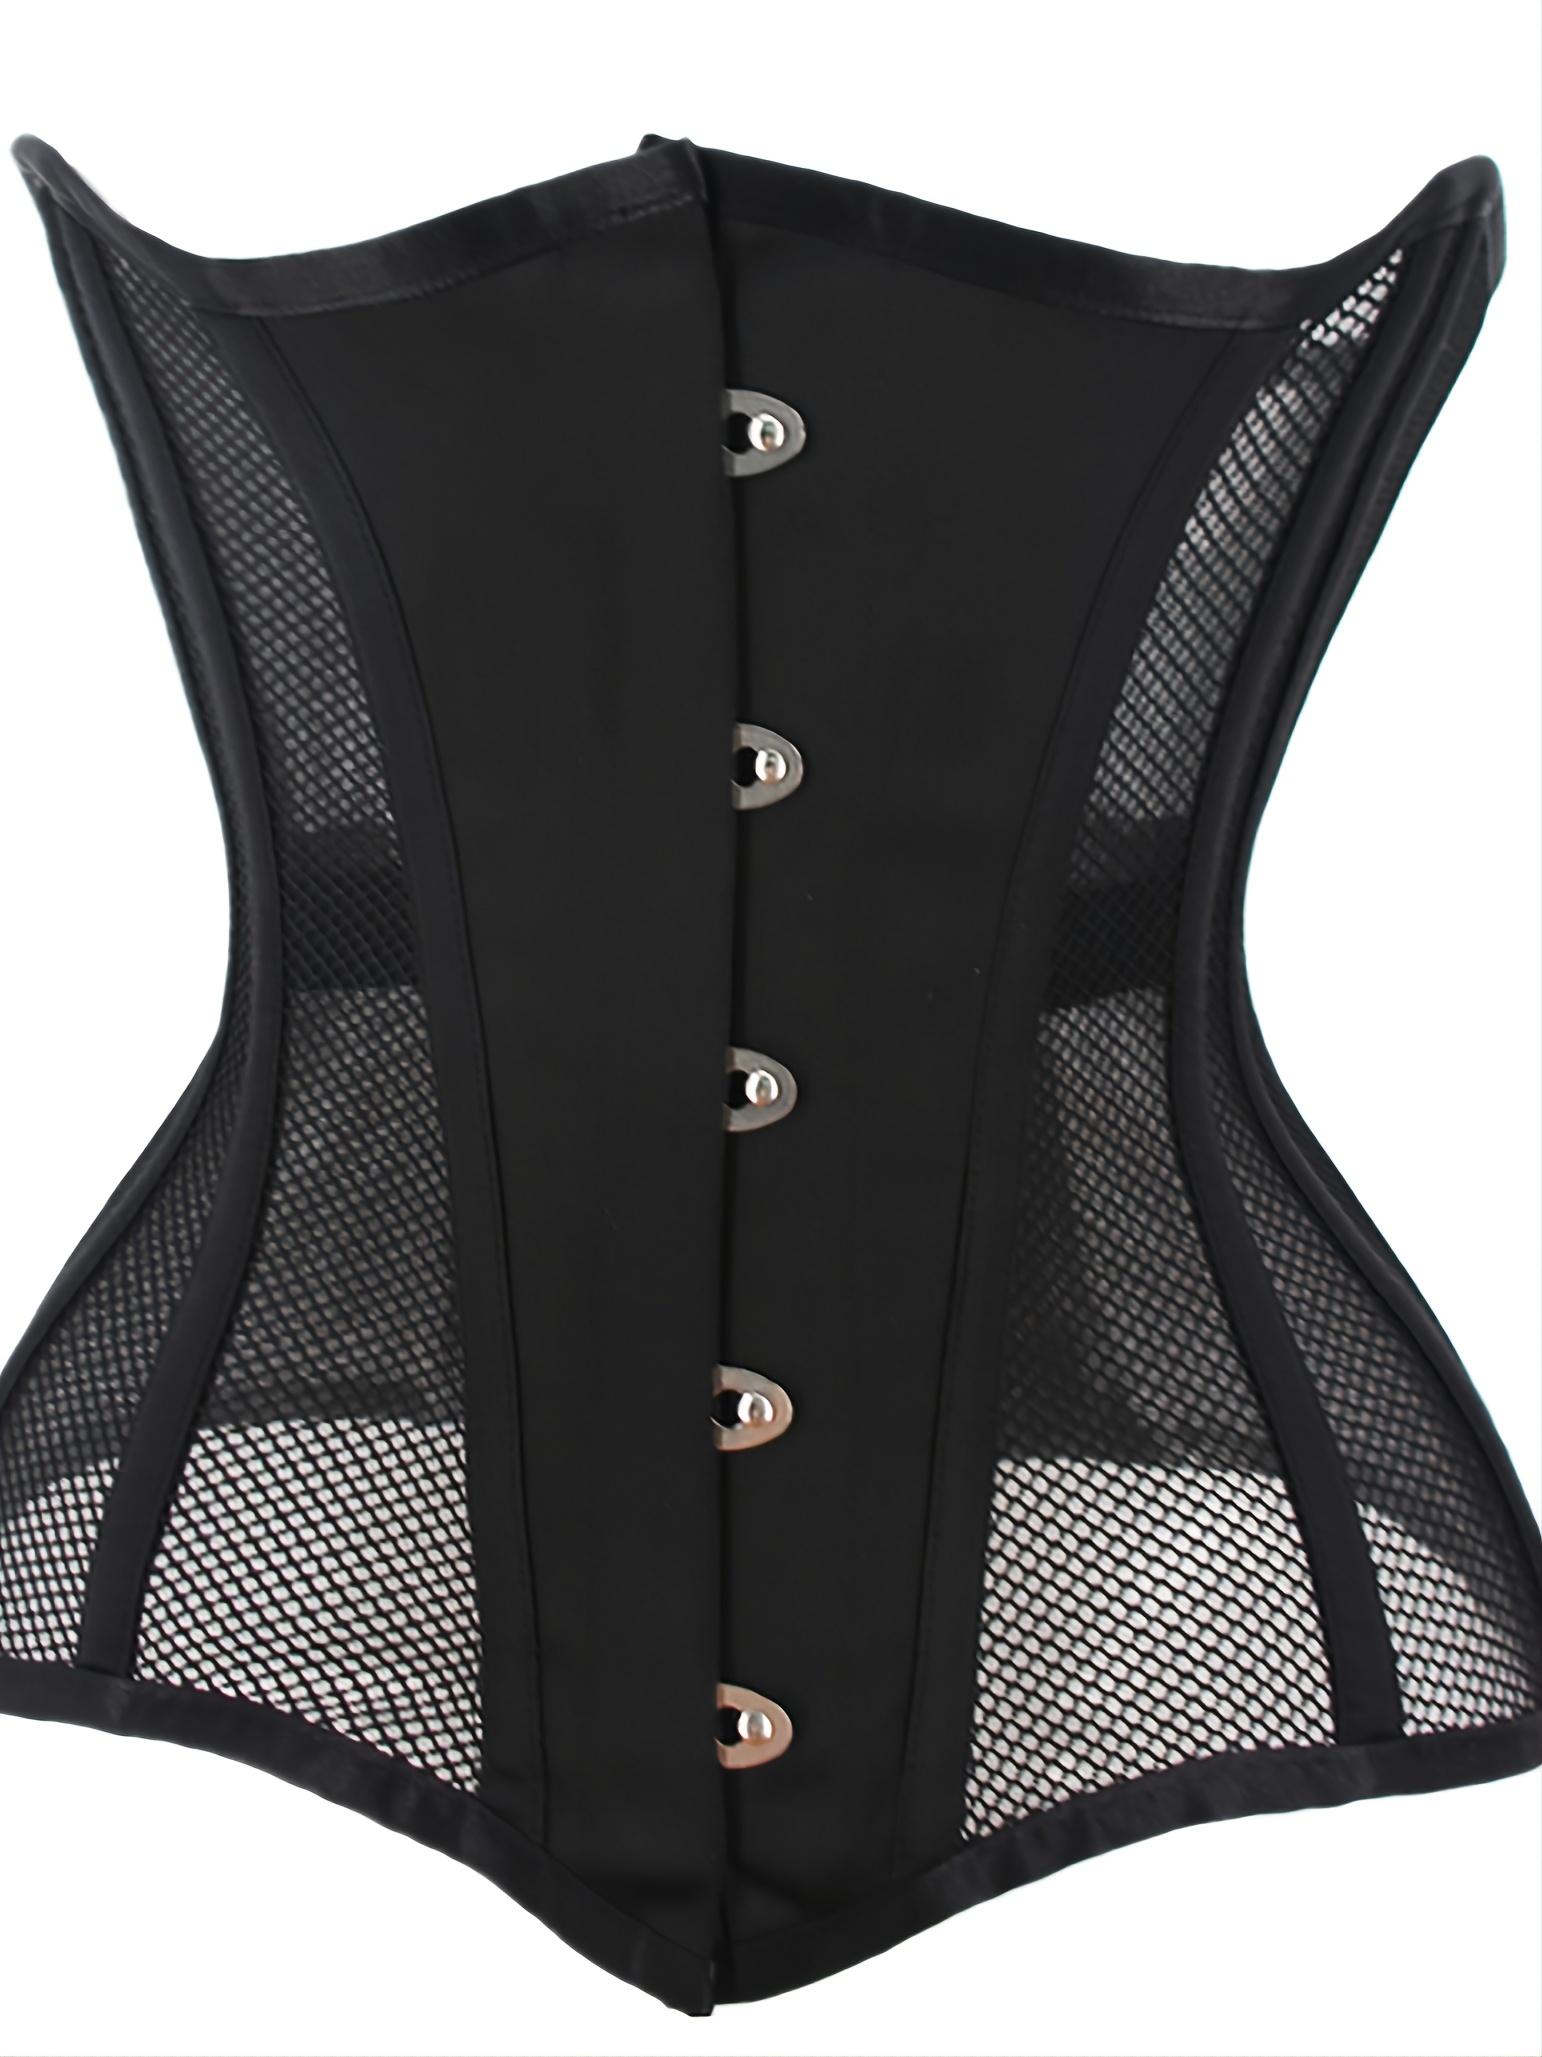 Tummy Control Corset Body Shaper With Steel Ring & Push Up Design